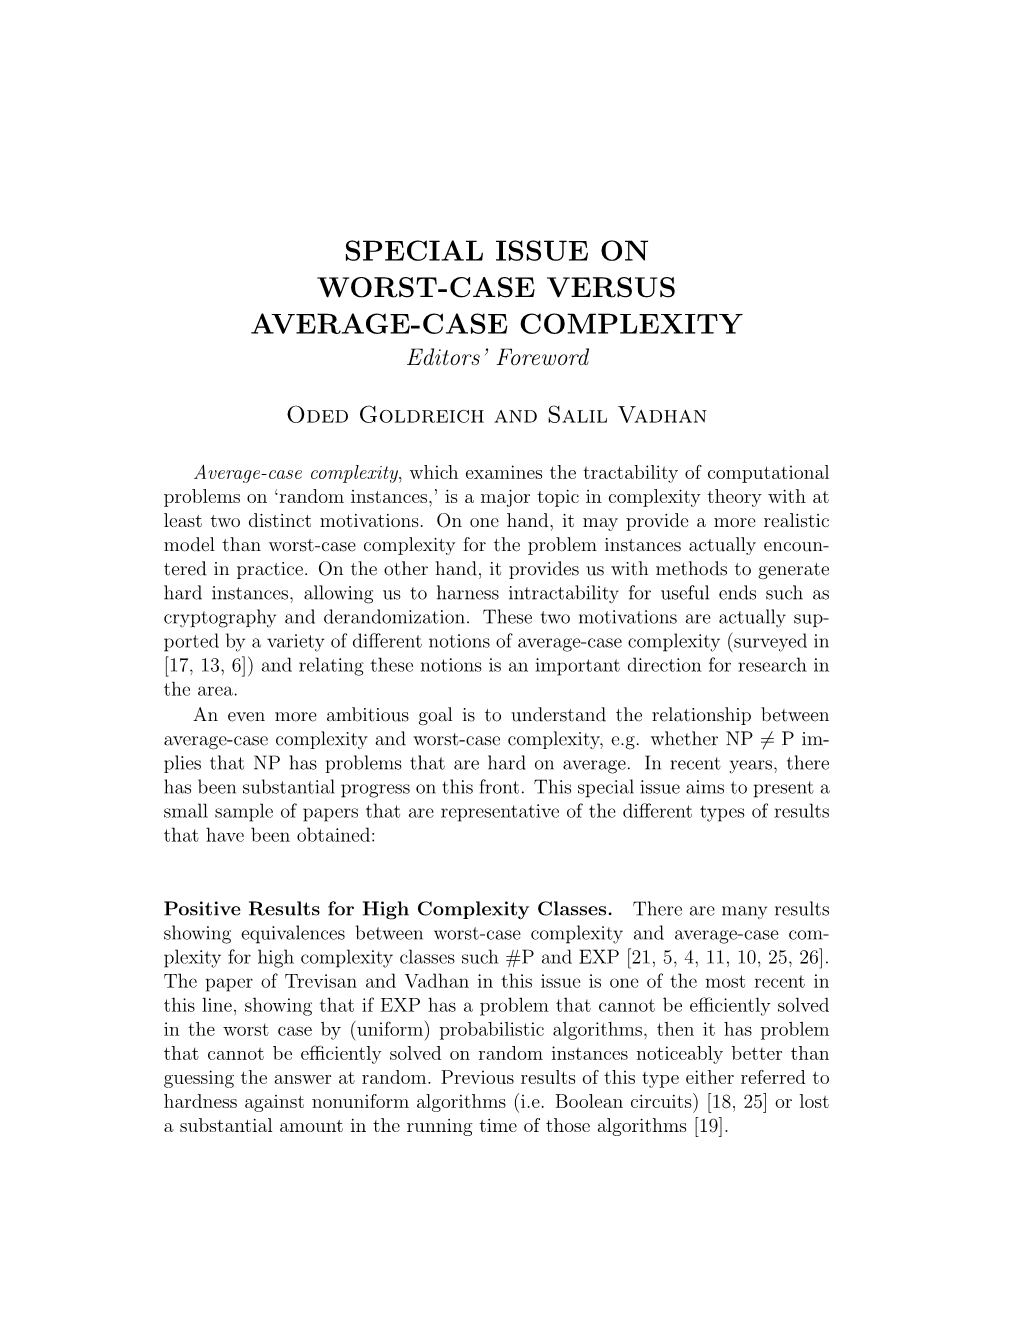 SPECIAL ISSUE on WORST-CASE VERSUS AVERAGE-CASE COMPLEXITY Editors’ Foreword